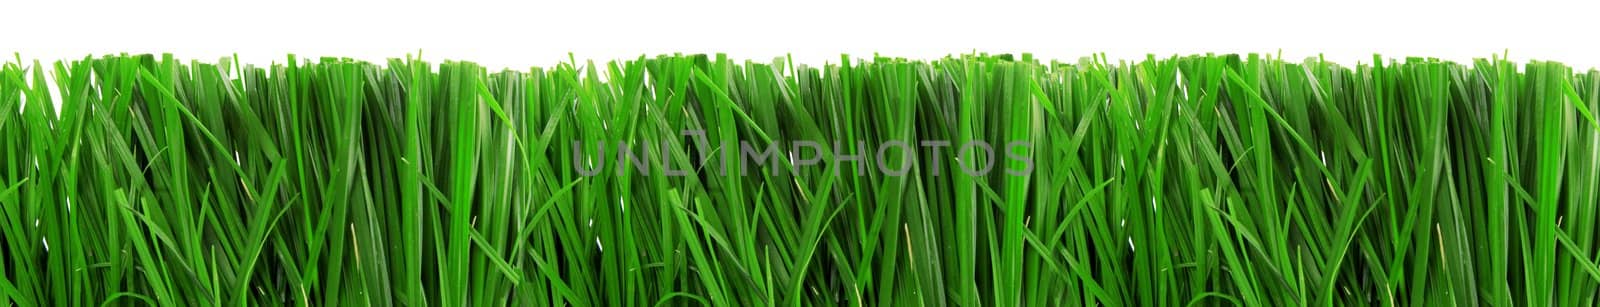 Green Grass Isolated on White by VictorO